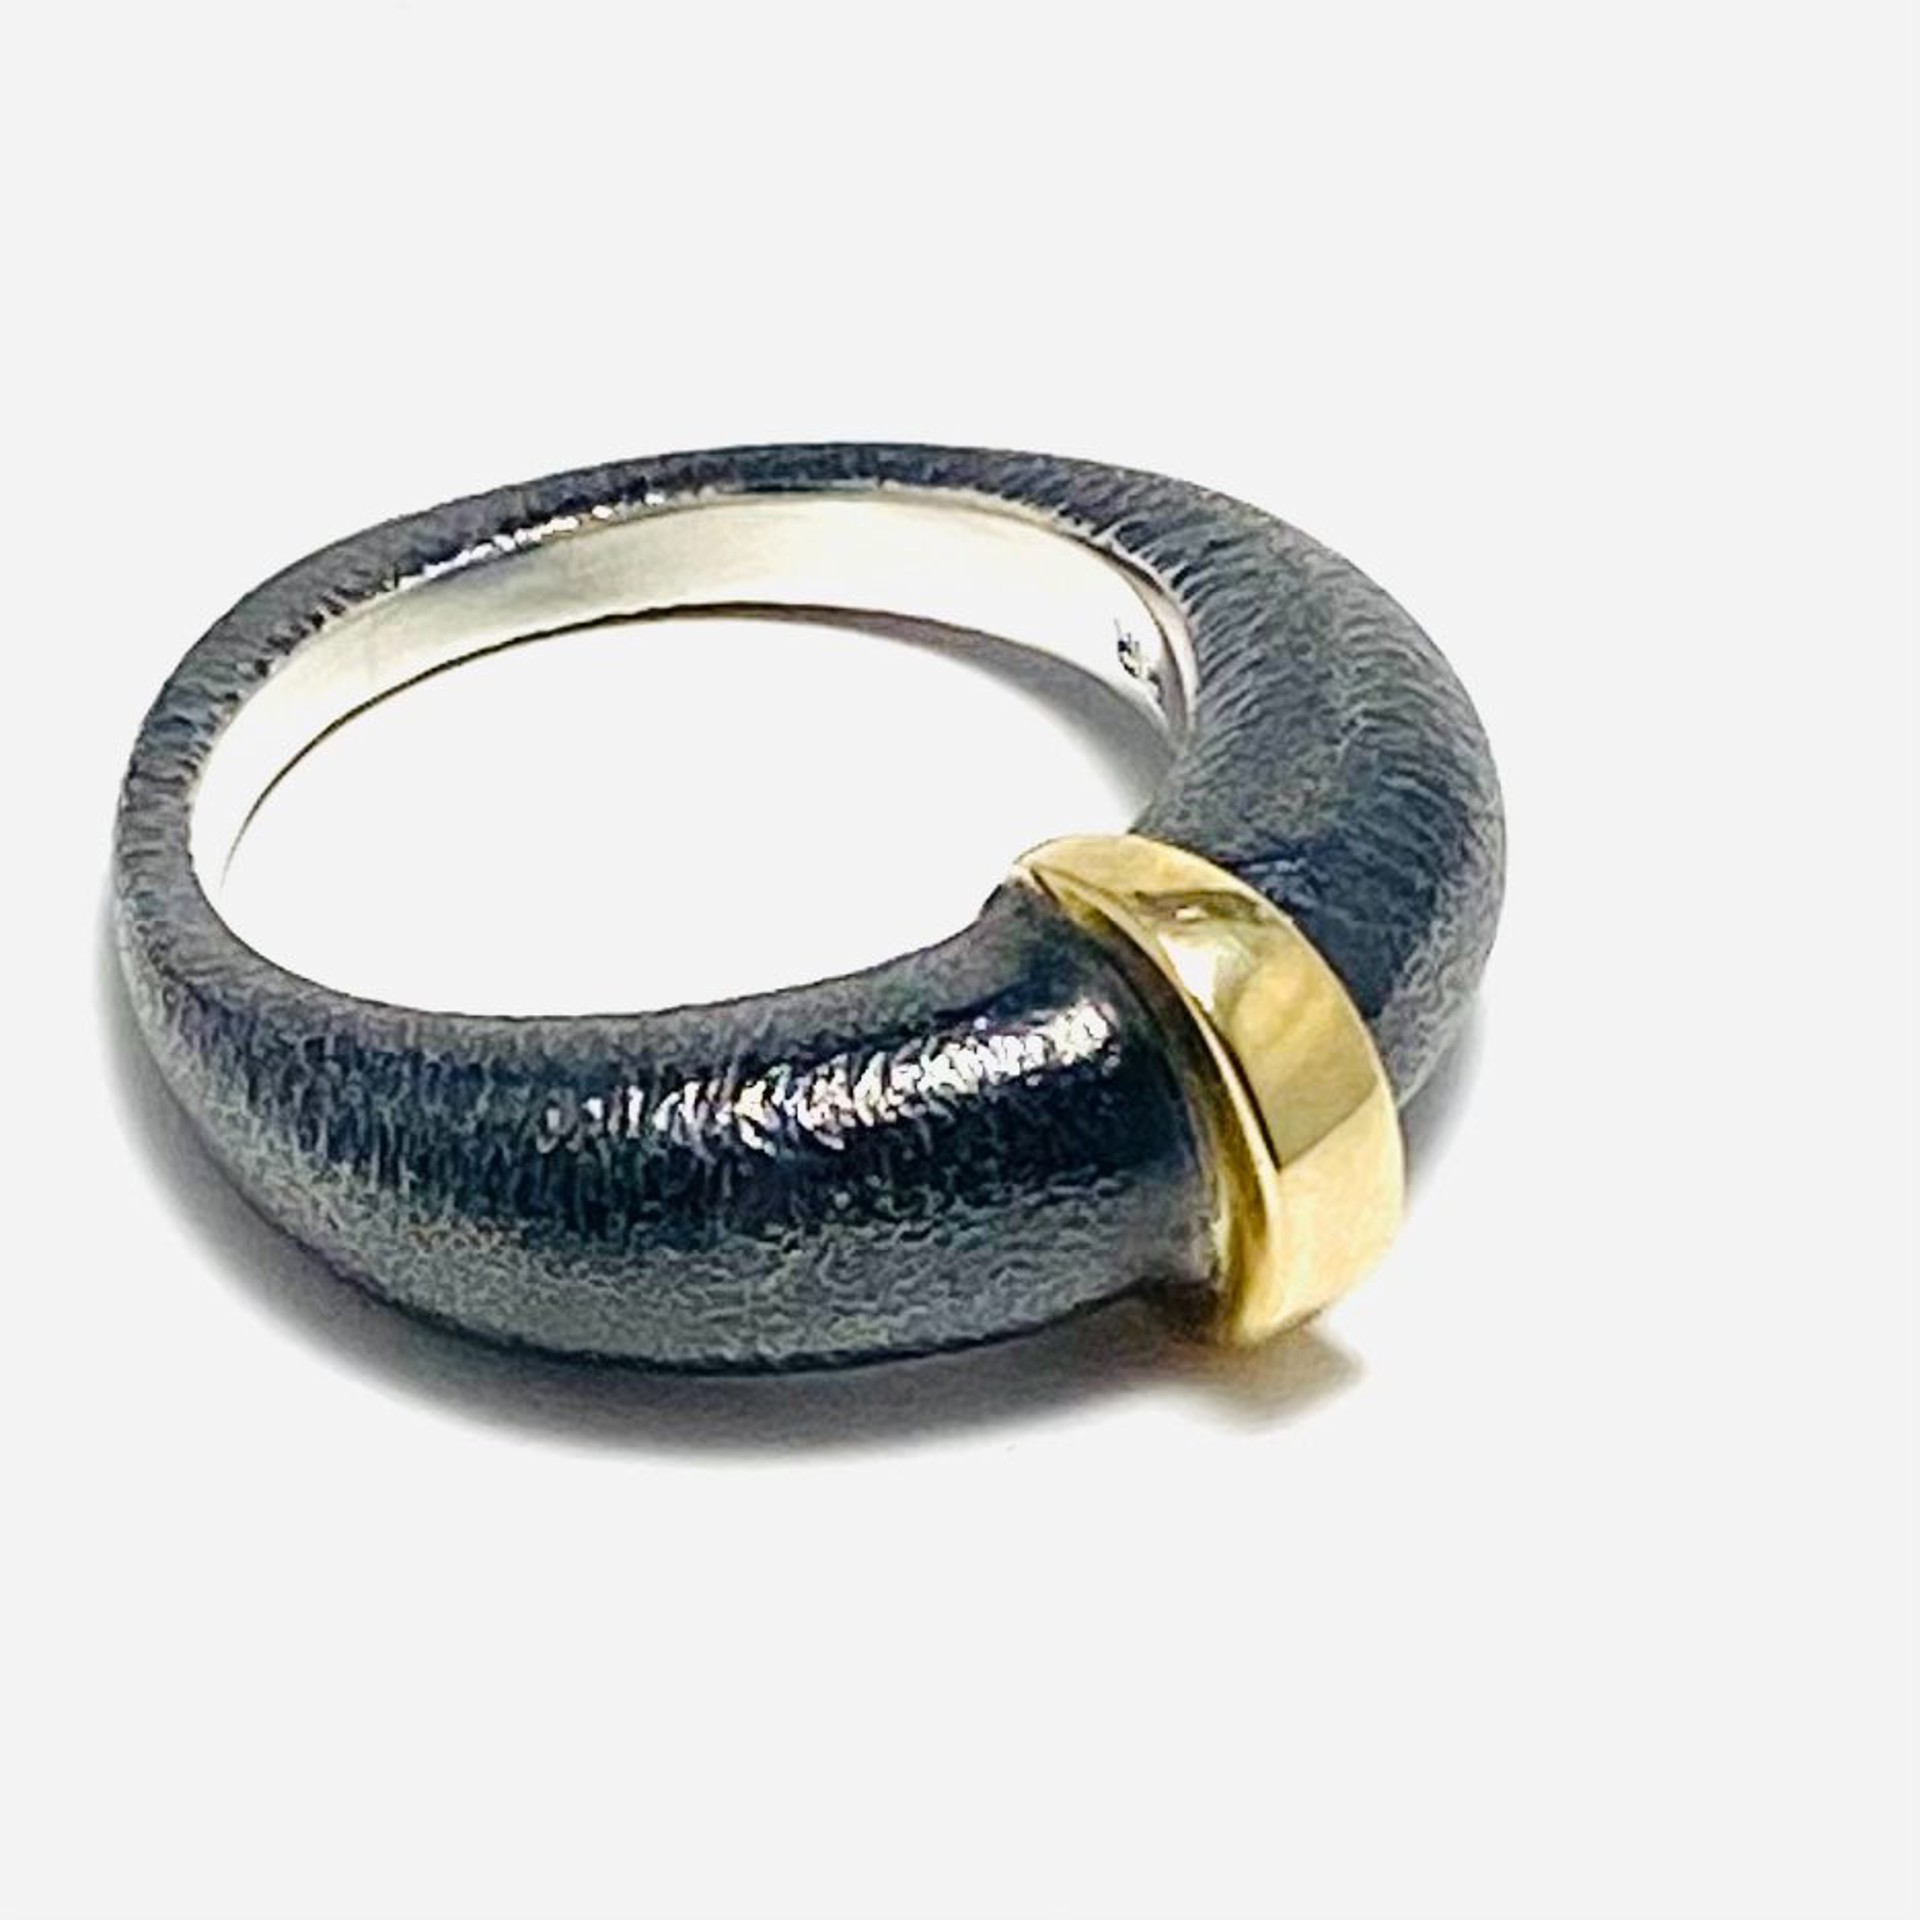 Oxidized Silver with Gold Accent  Ring sz8.25 BORA22-15 by Bora